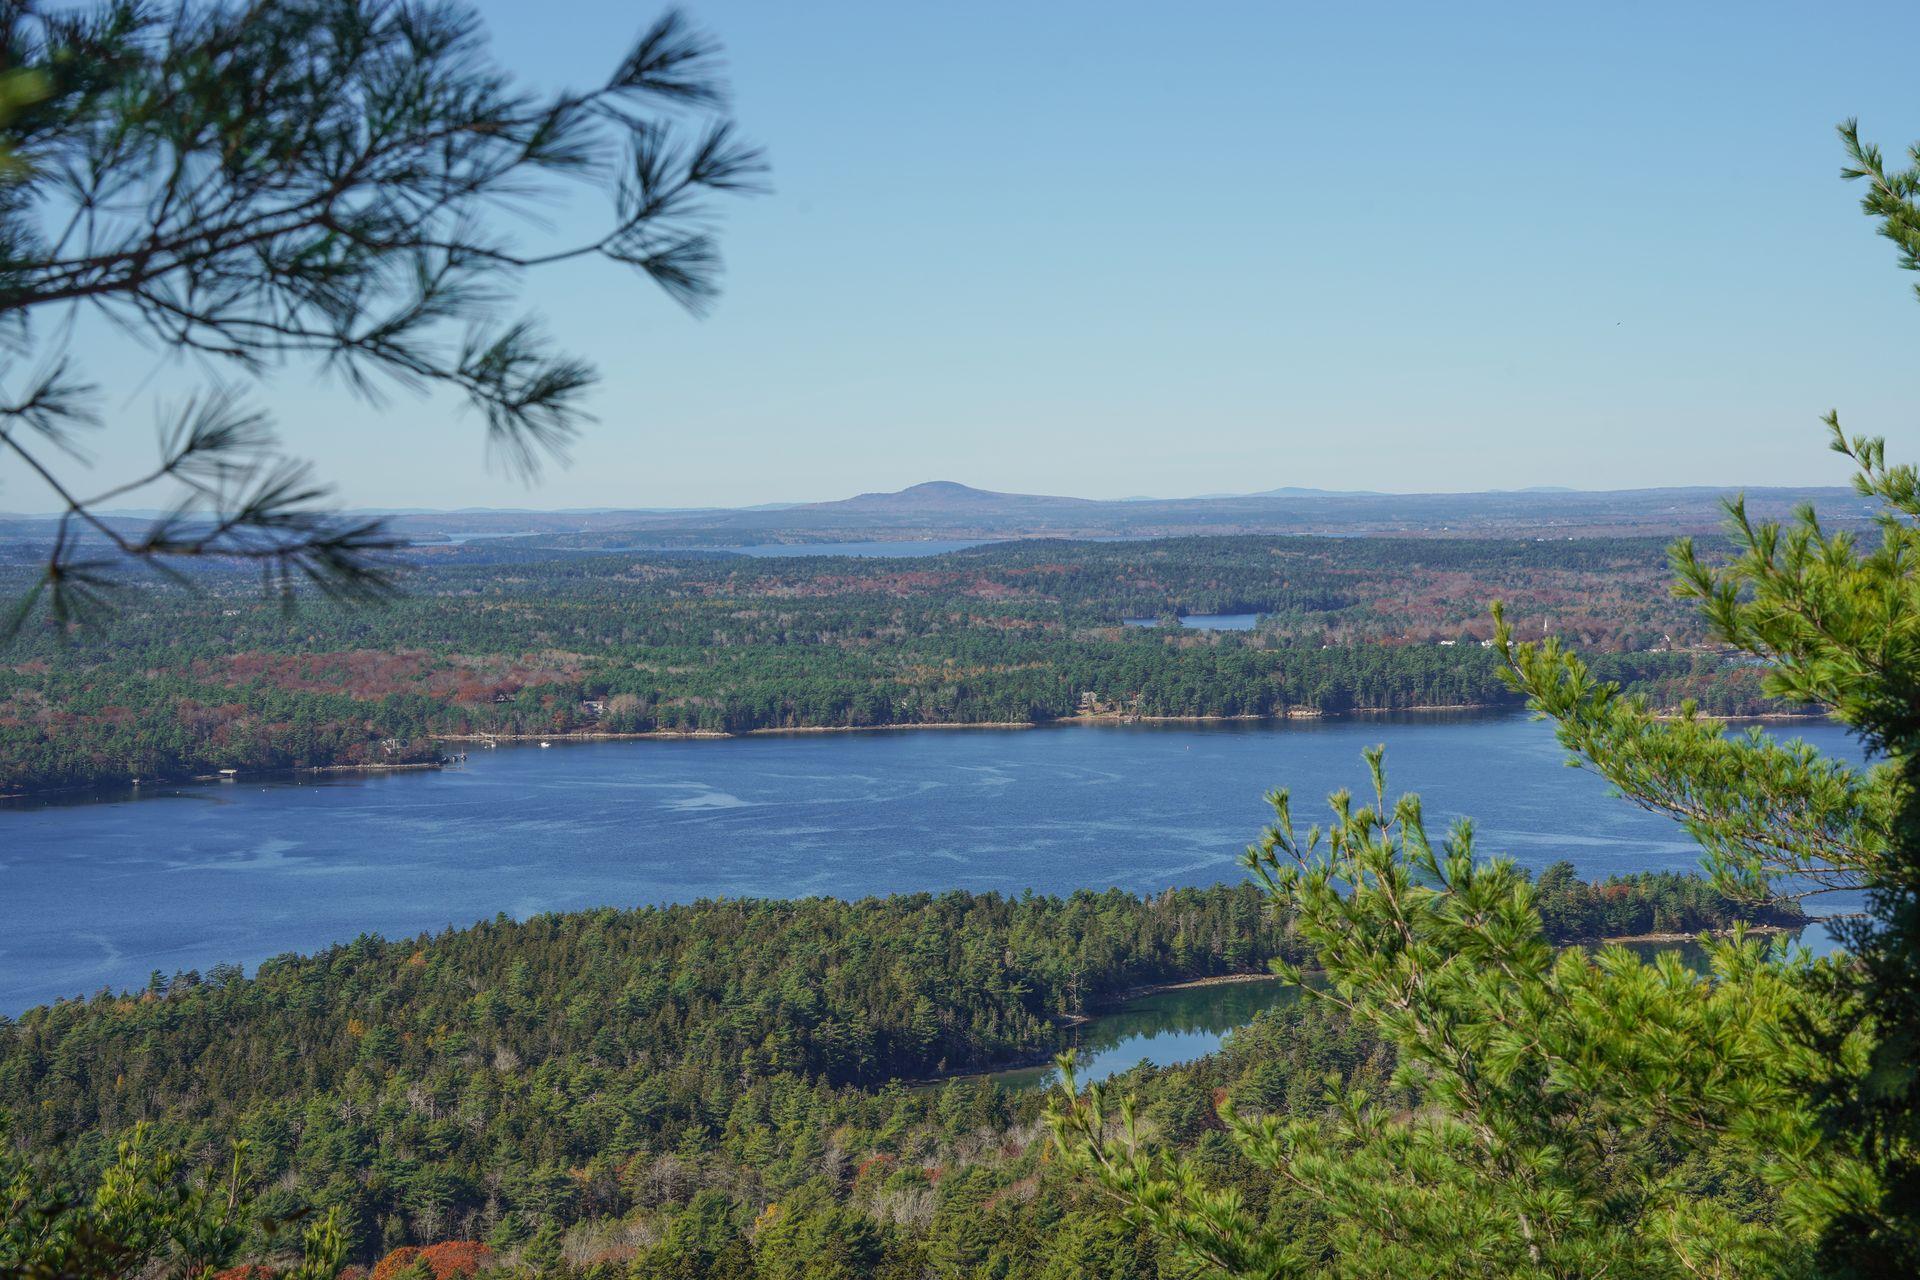 A few lakes surrounded by rolling hills and trees, seen from the Carriage Roads in Acadia.